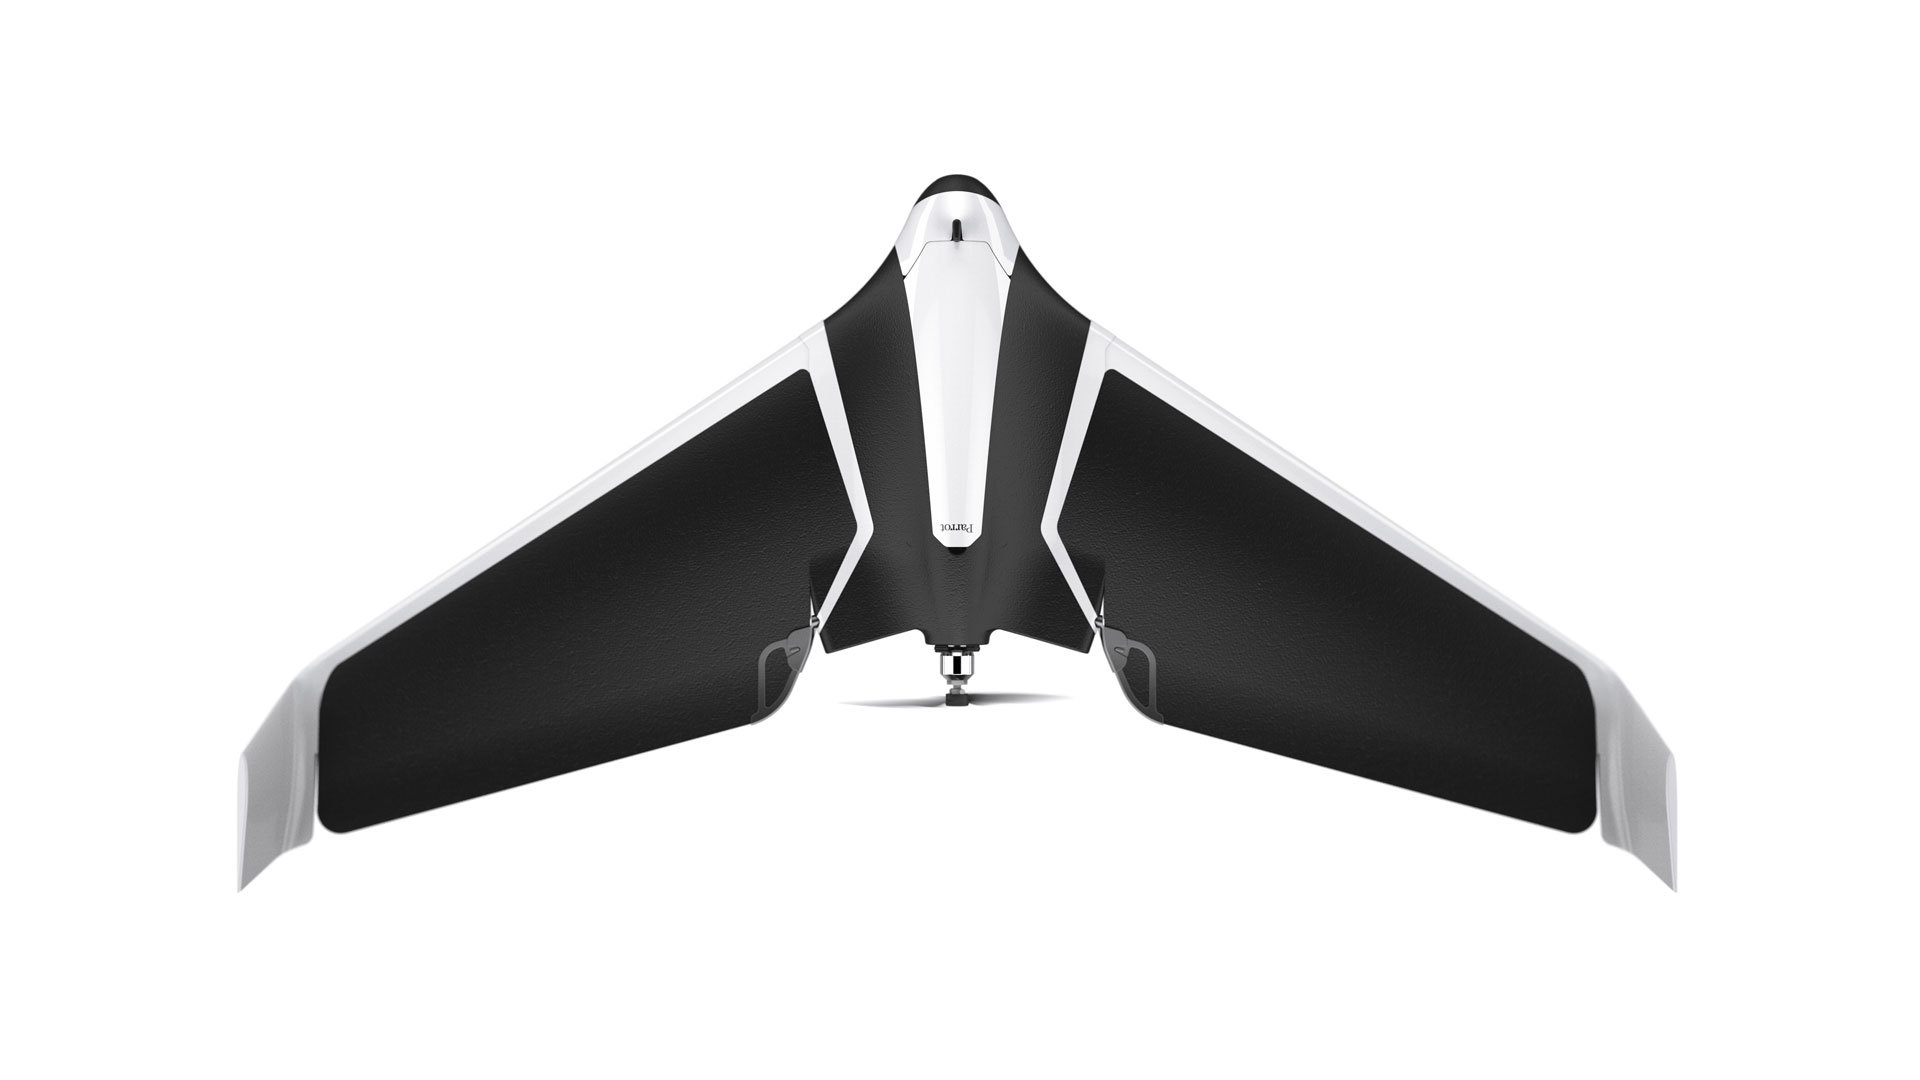 Top notch facts to know about parrot disco fpv drone